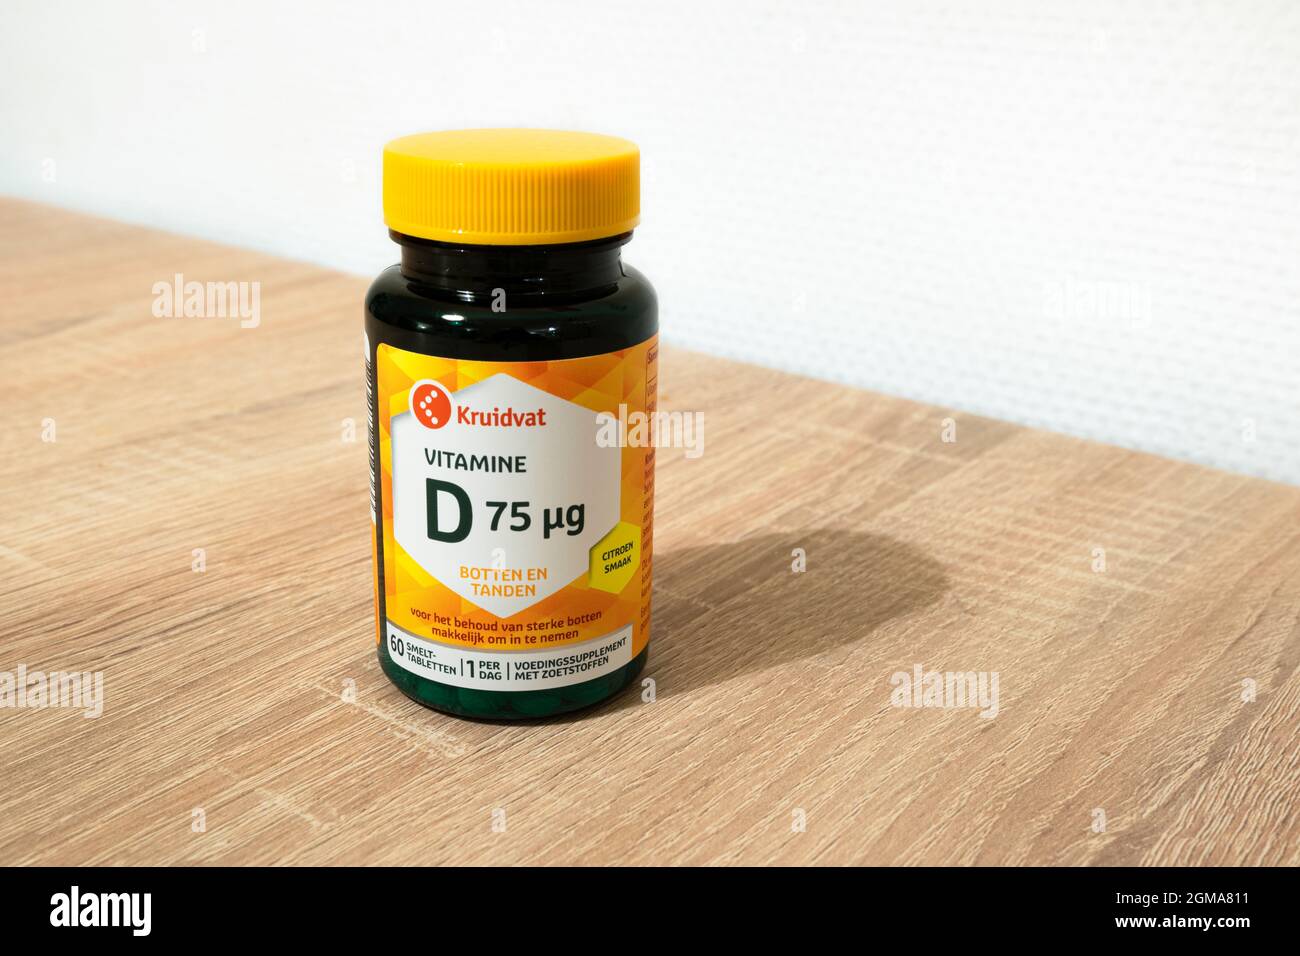 Bottle of vitamine D capsules from the brand Kruidvat on a table Stock  Photo - Alamy